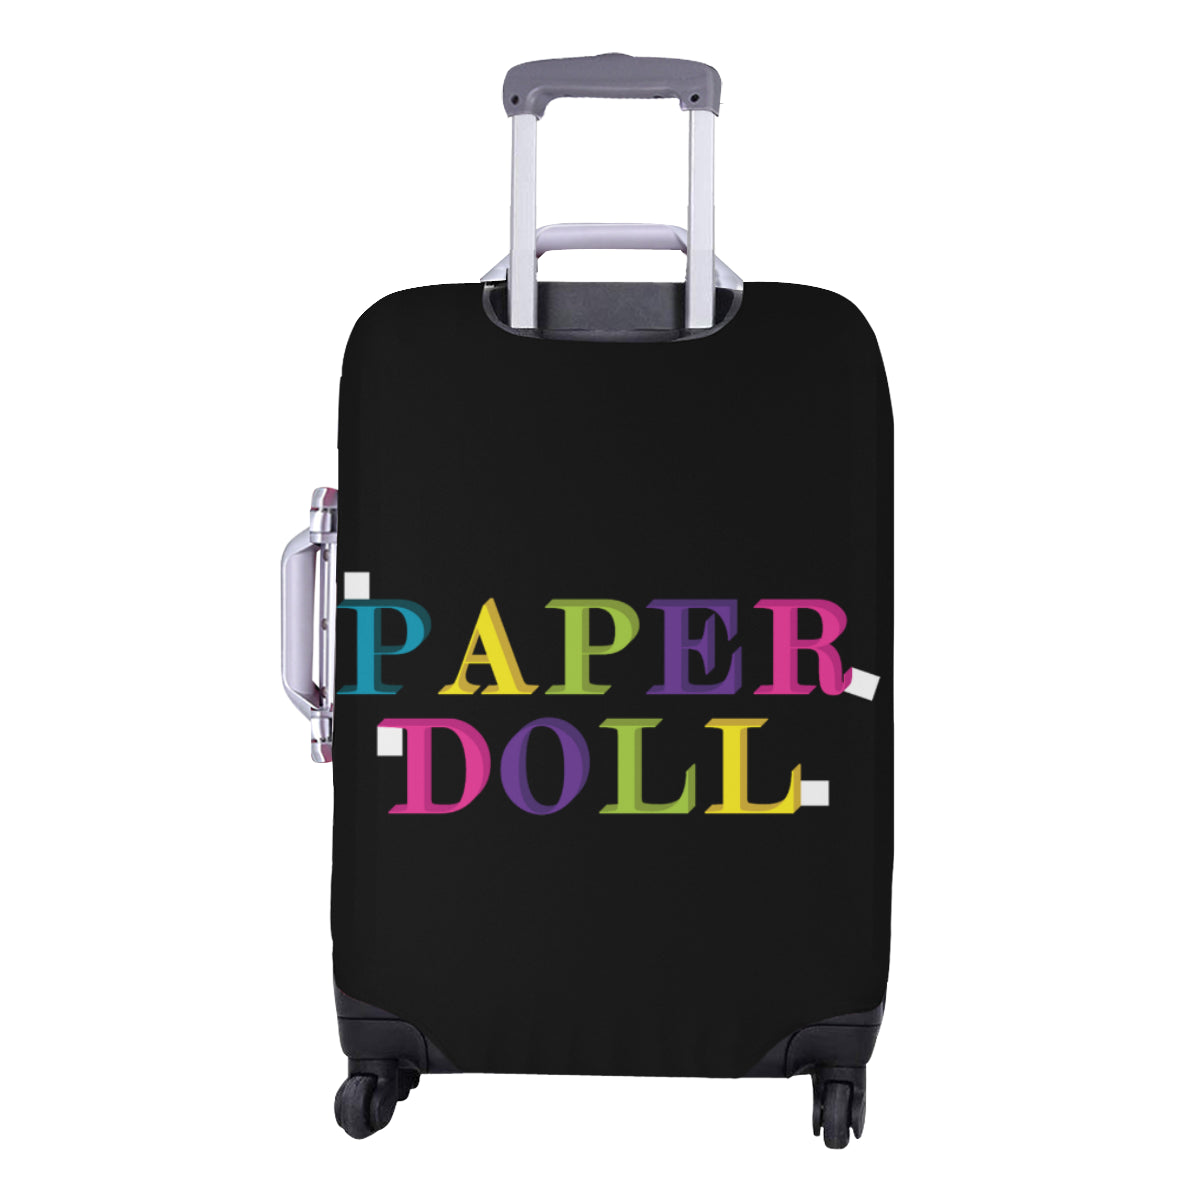 PAPER DOLL SHOE LUGGAGE COVER - MEDIUM